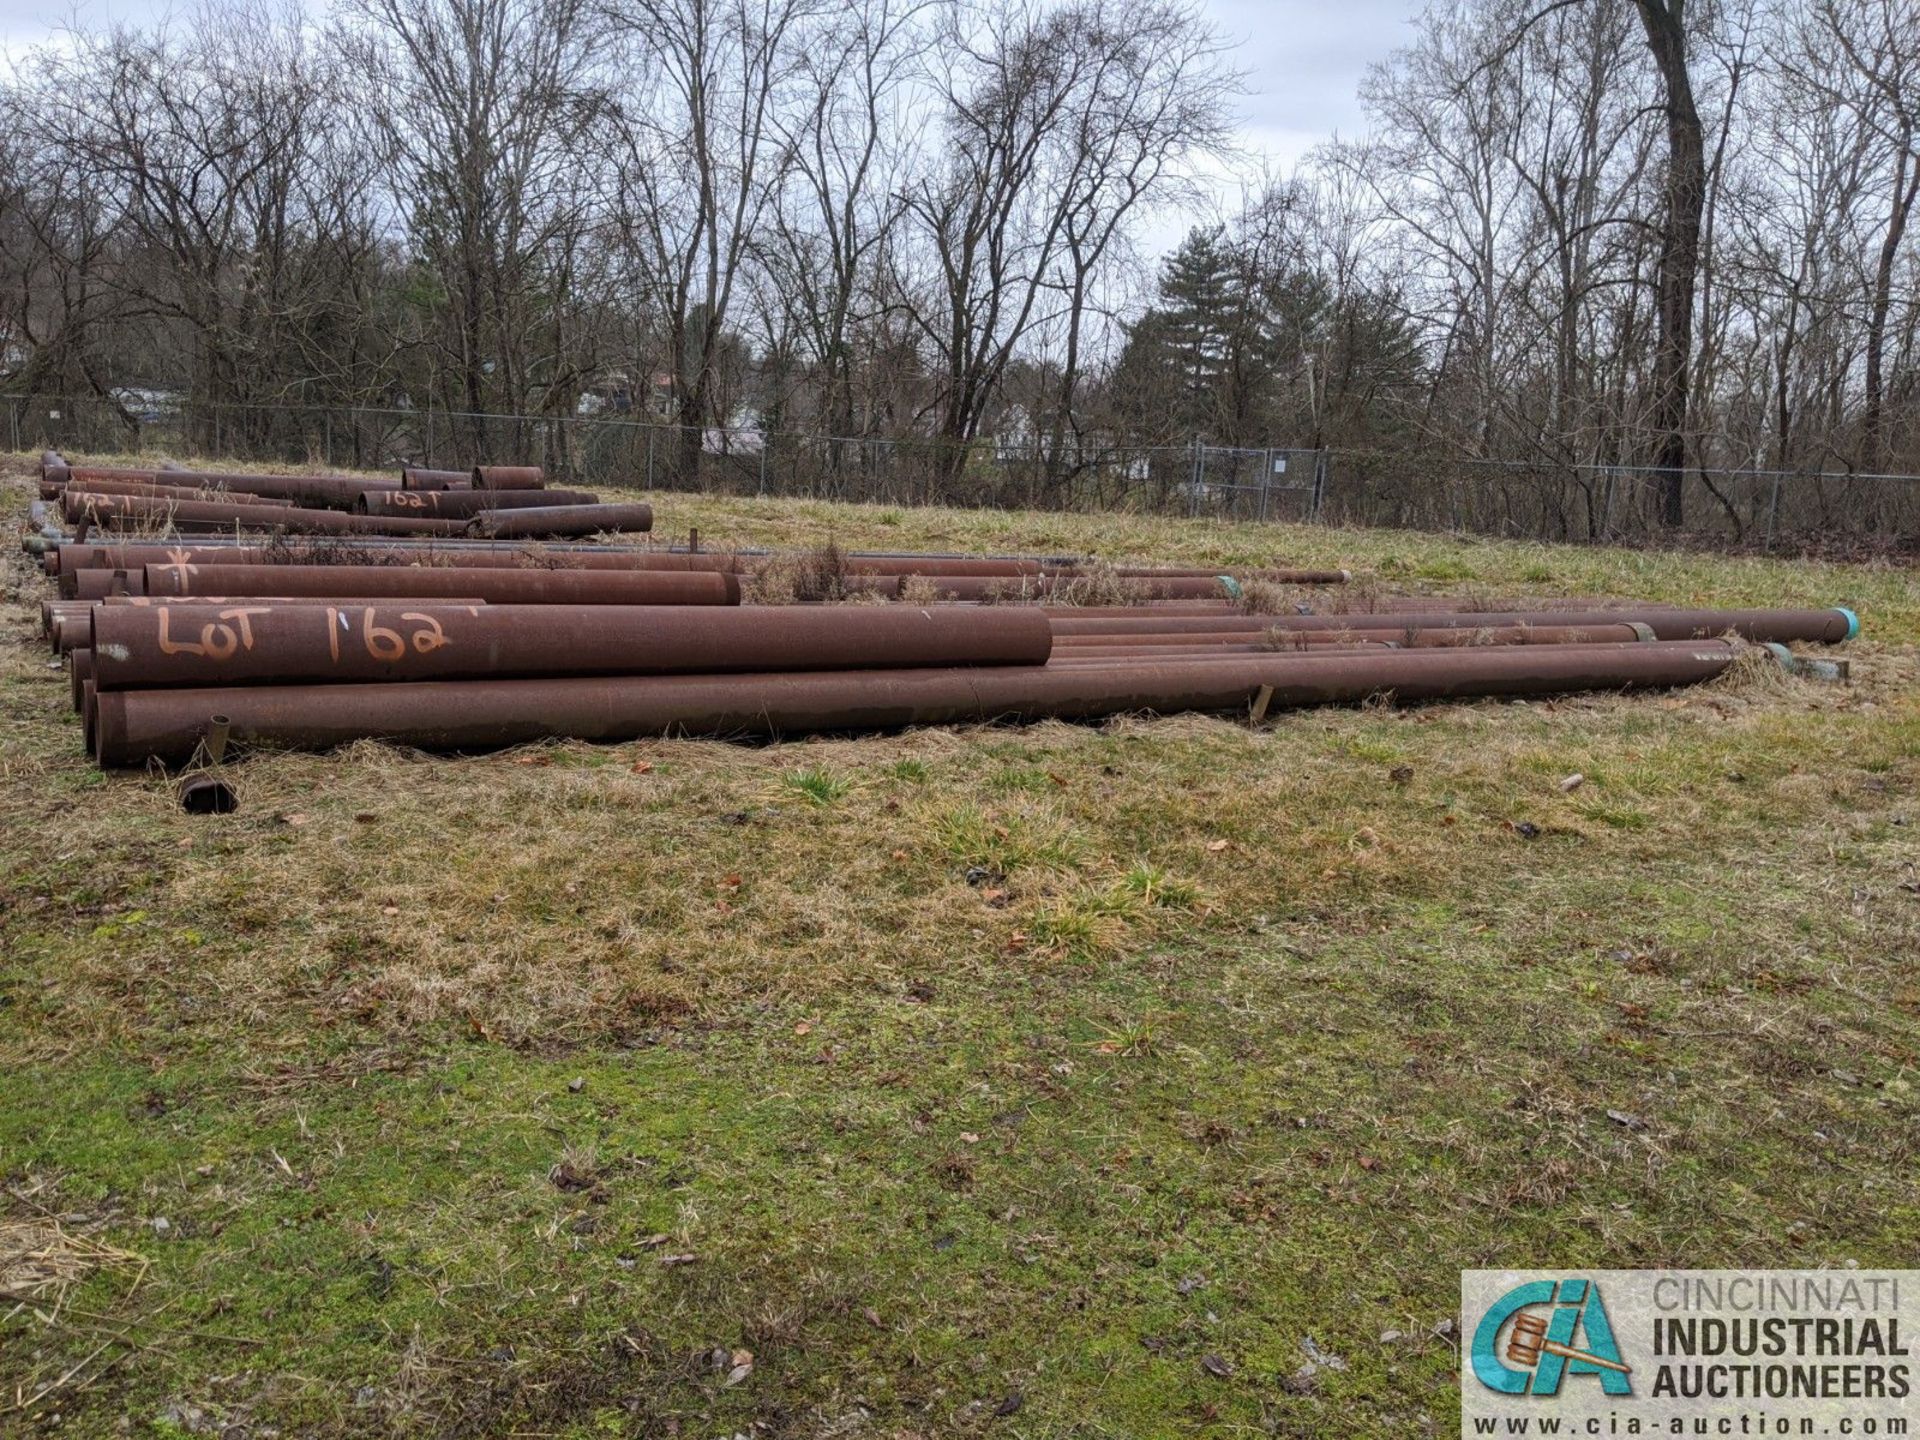 (LOT) LARGE QUANTITY OF STEEL PIPE OUT IN YARD - ONLY THAT MARKED WITH ORANGE PAINT, INCLUDES PIPE